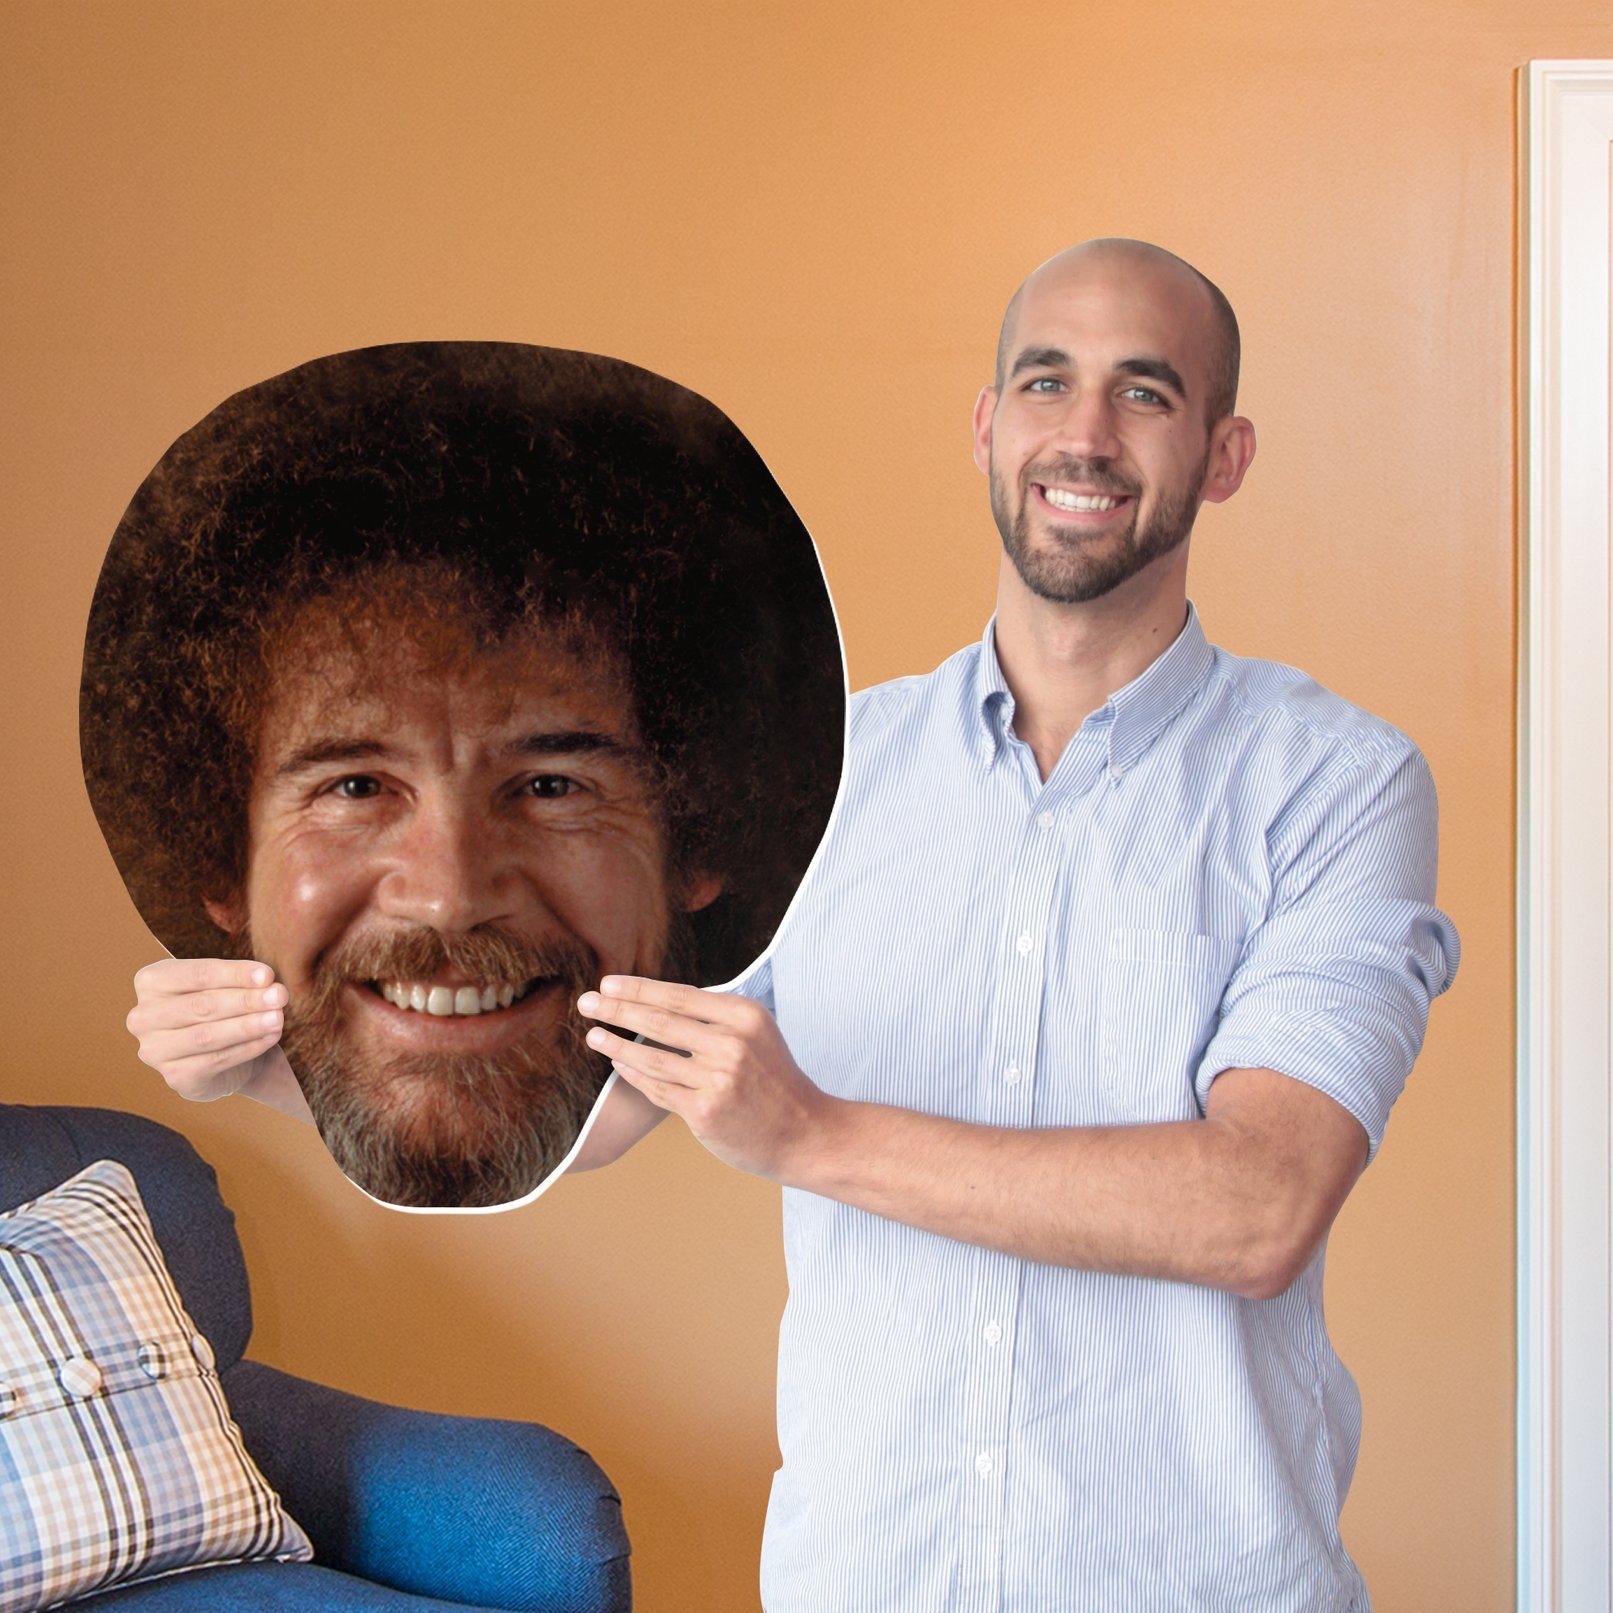 https://fathead.com/collections/bob-ross/products/m1091-01600?variant=33182093475928